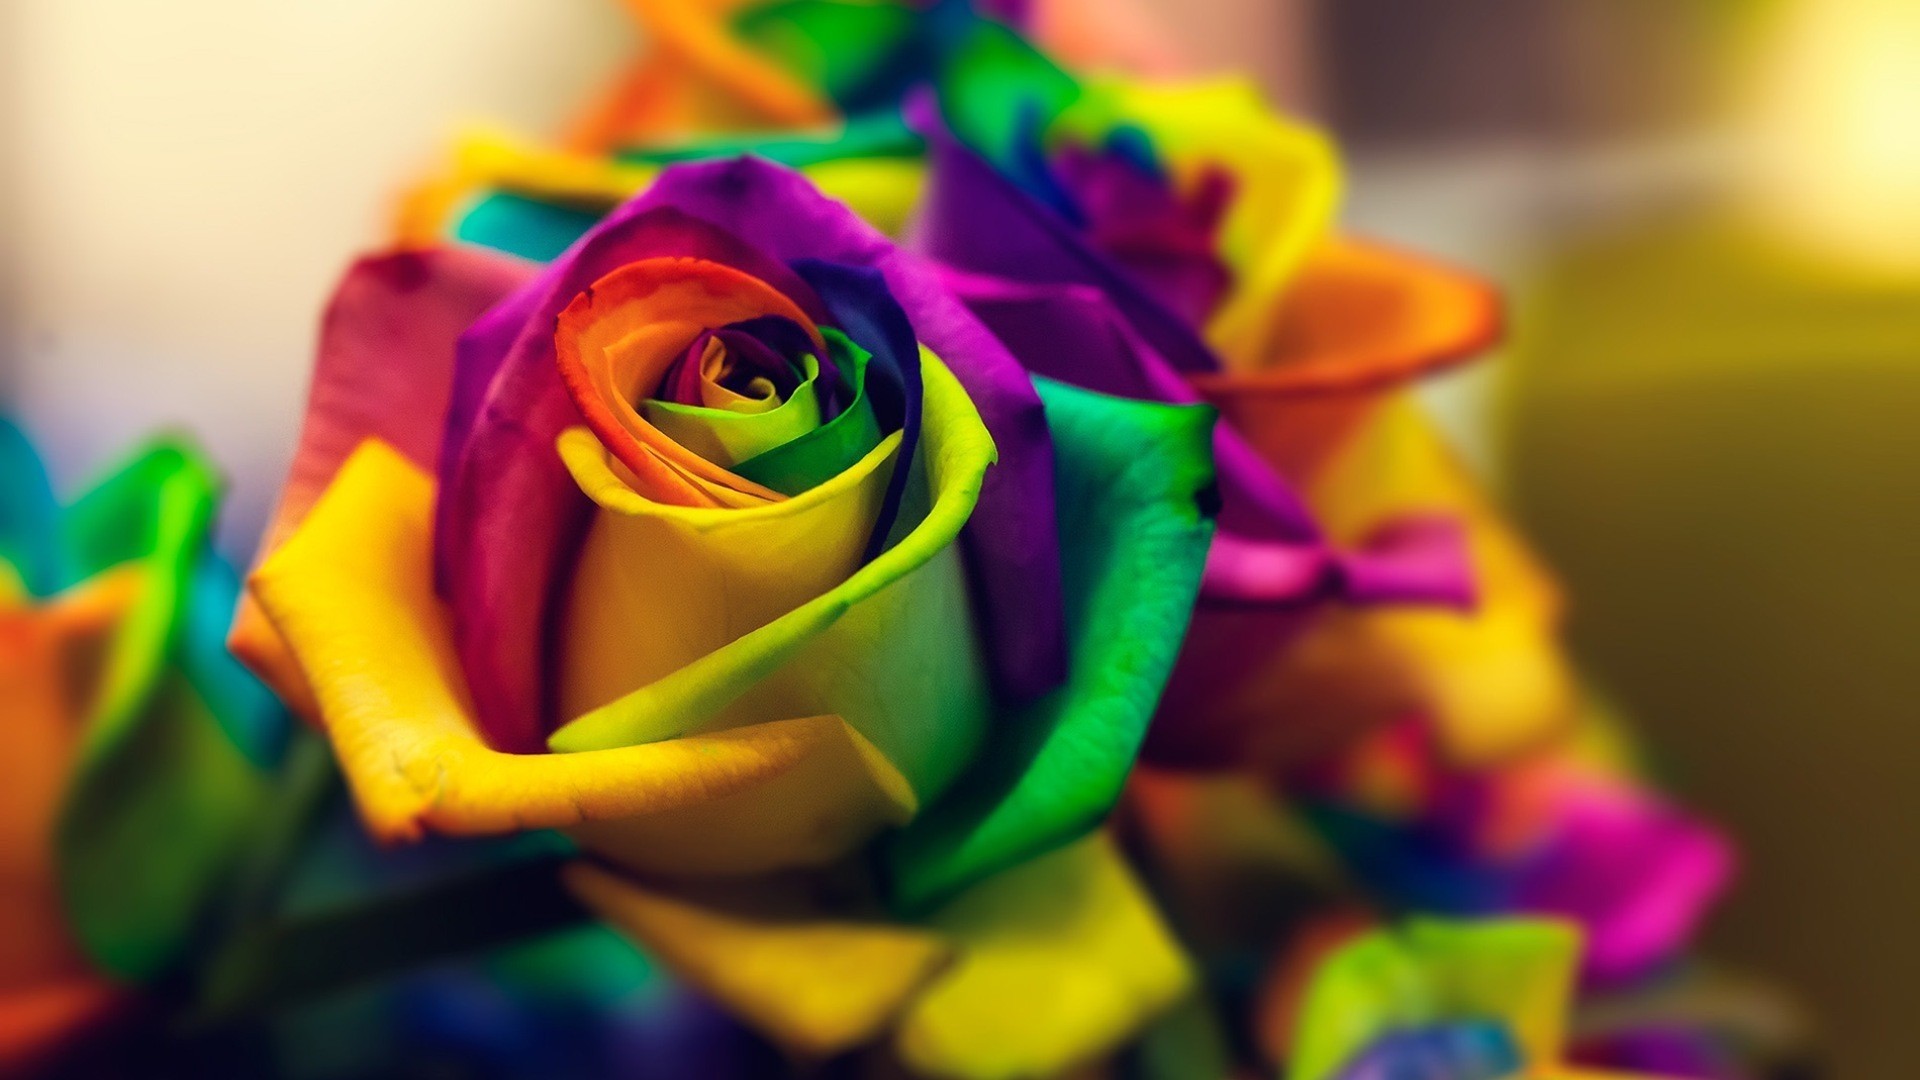 Rainbow Rose Wallpaper Picture hd